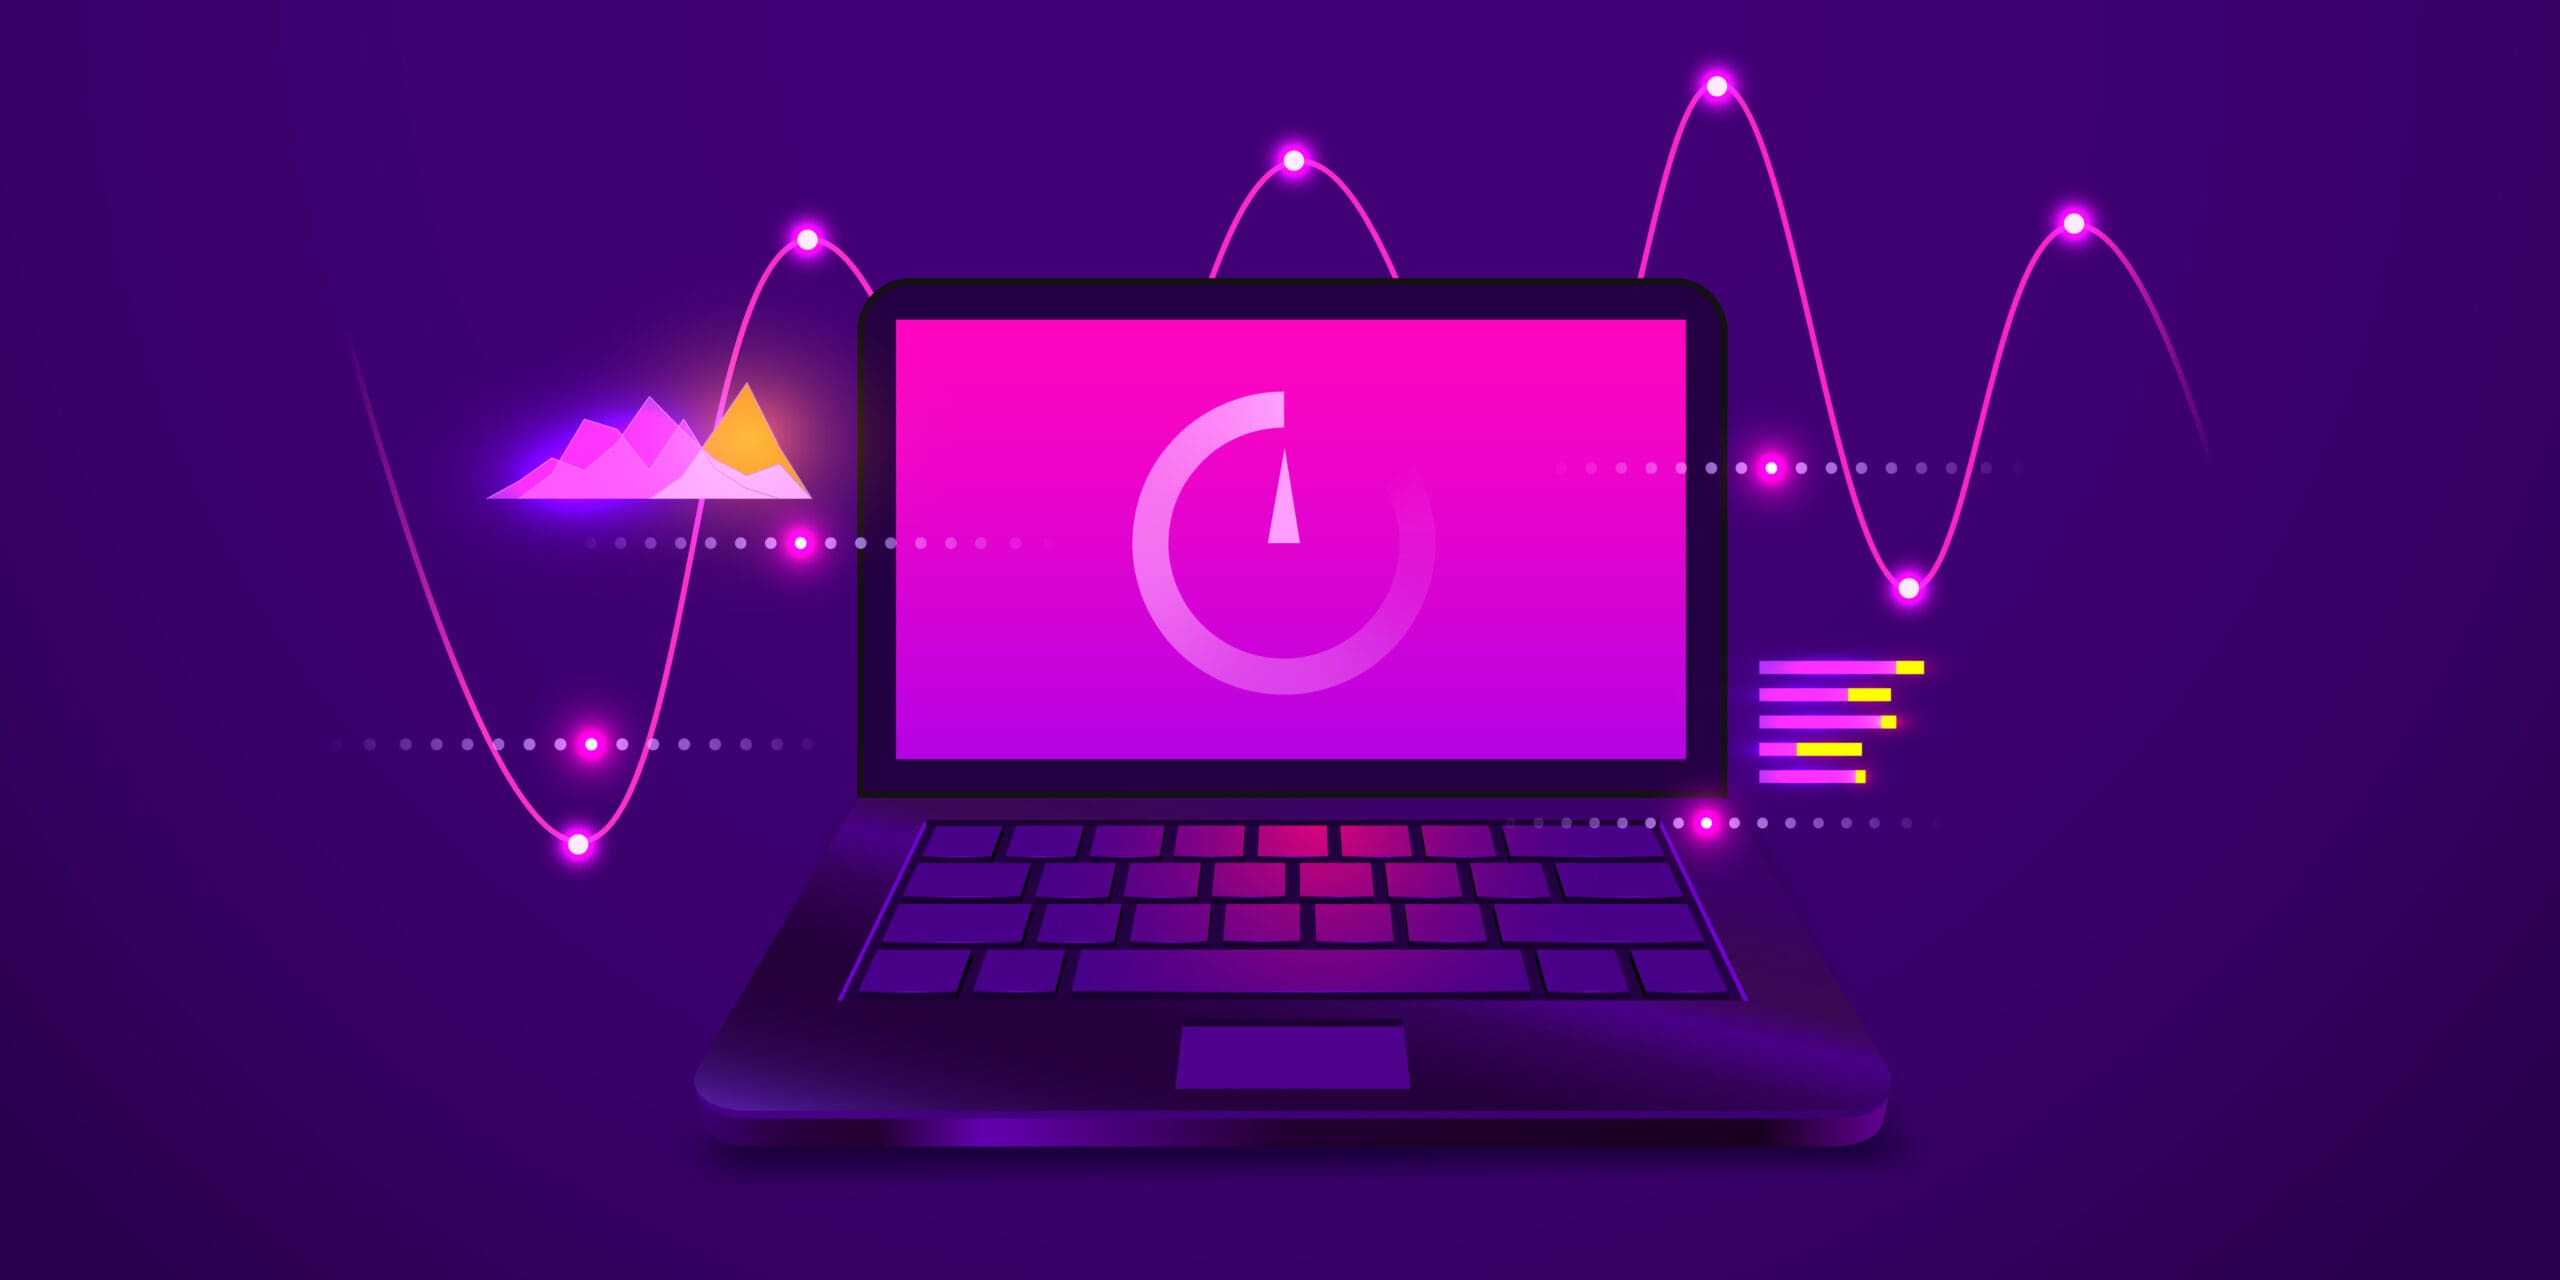 A stylized illustration of a laptop with a screen displaying a circular icon. The background features pink, glowing lines forming data wave patterns and bar charts. The theme is vibrant, with predominant shades of purple and accents of yellow and pink.